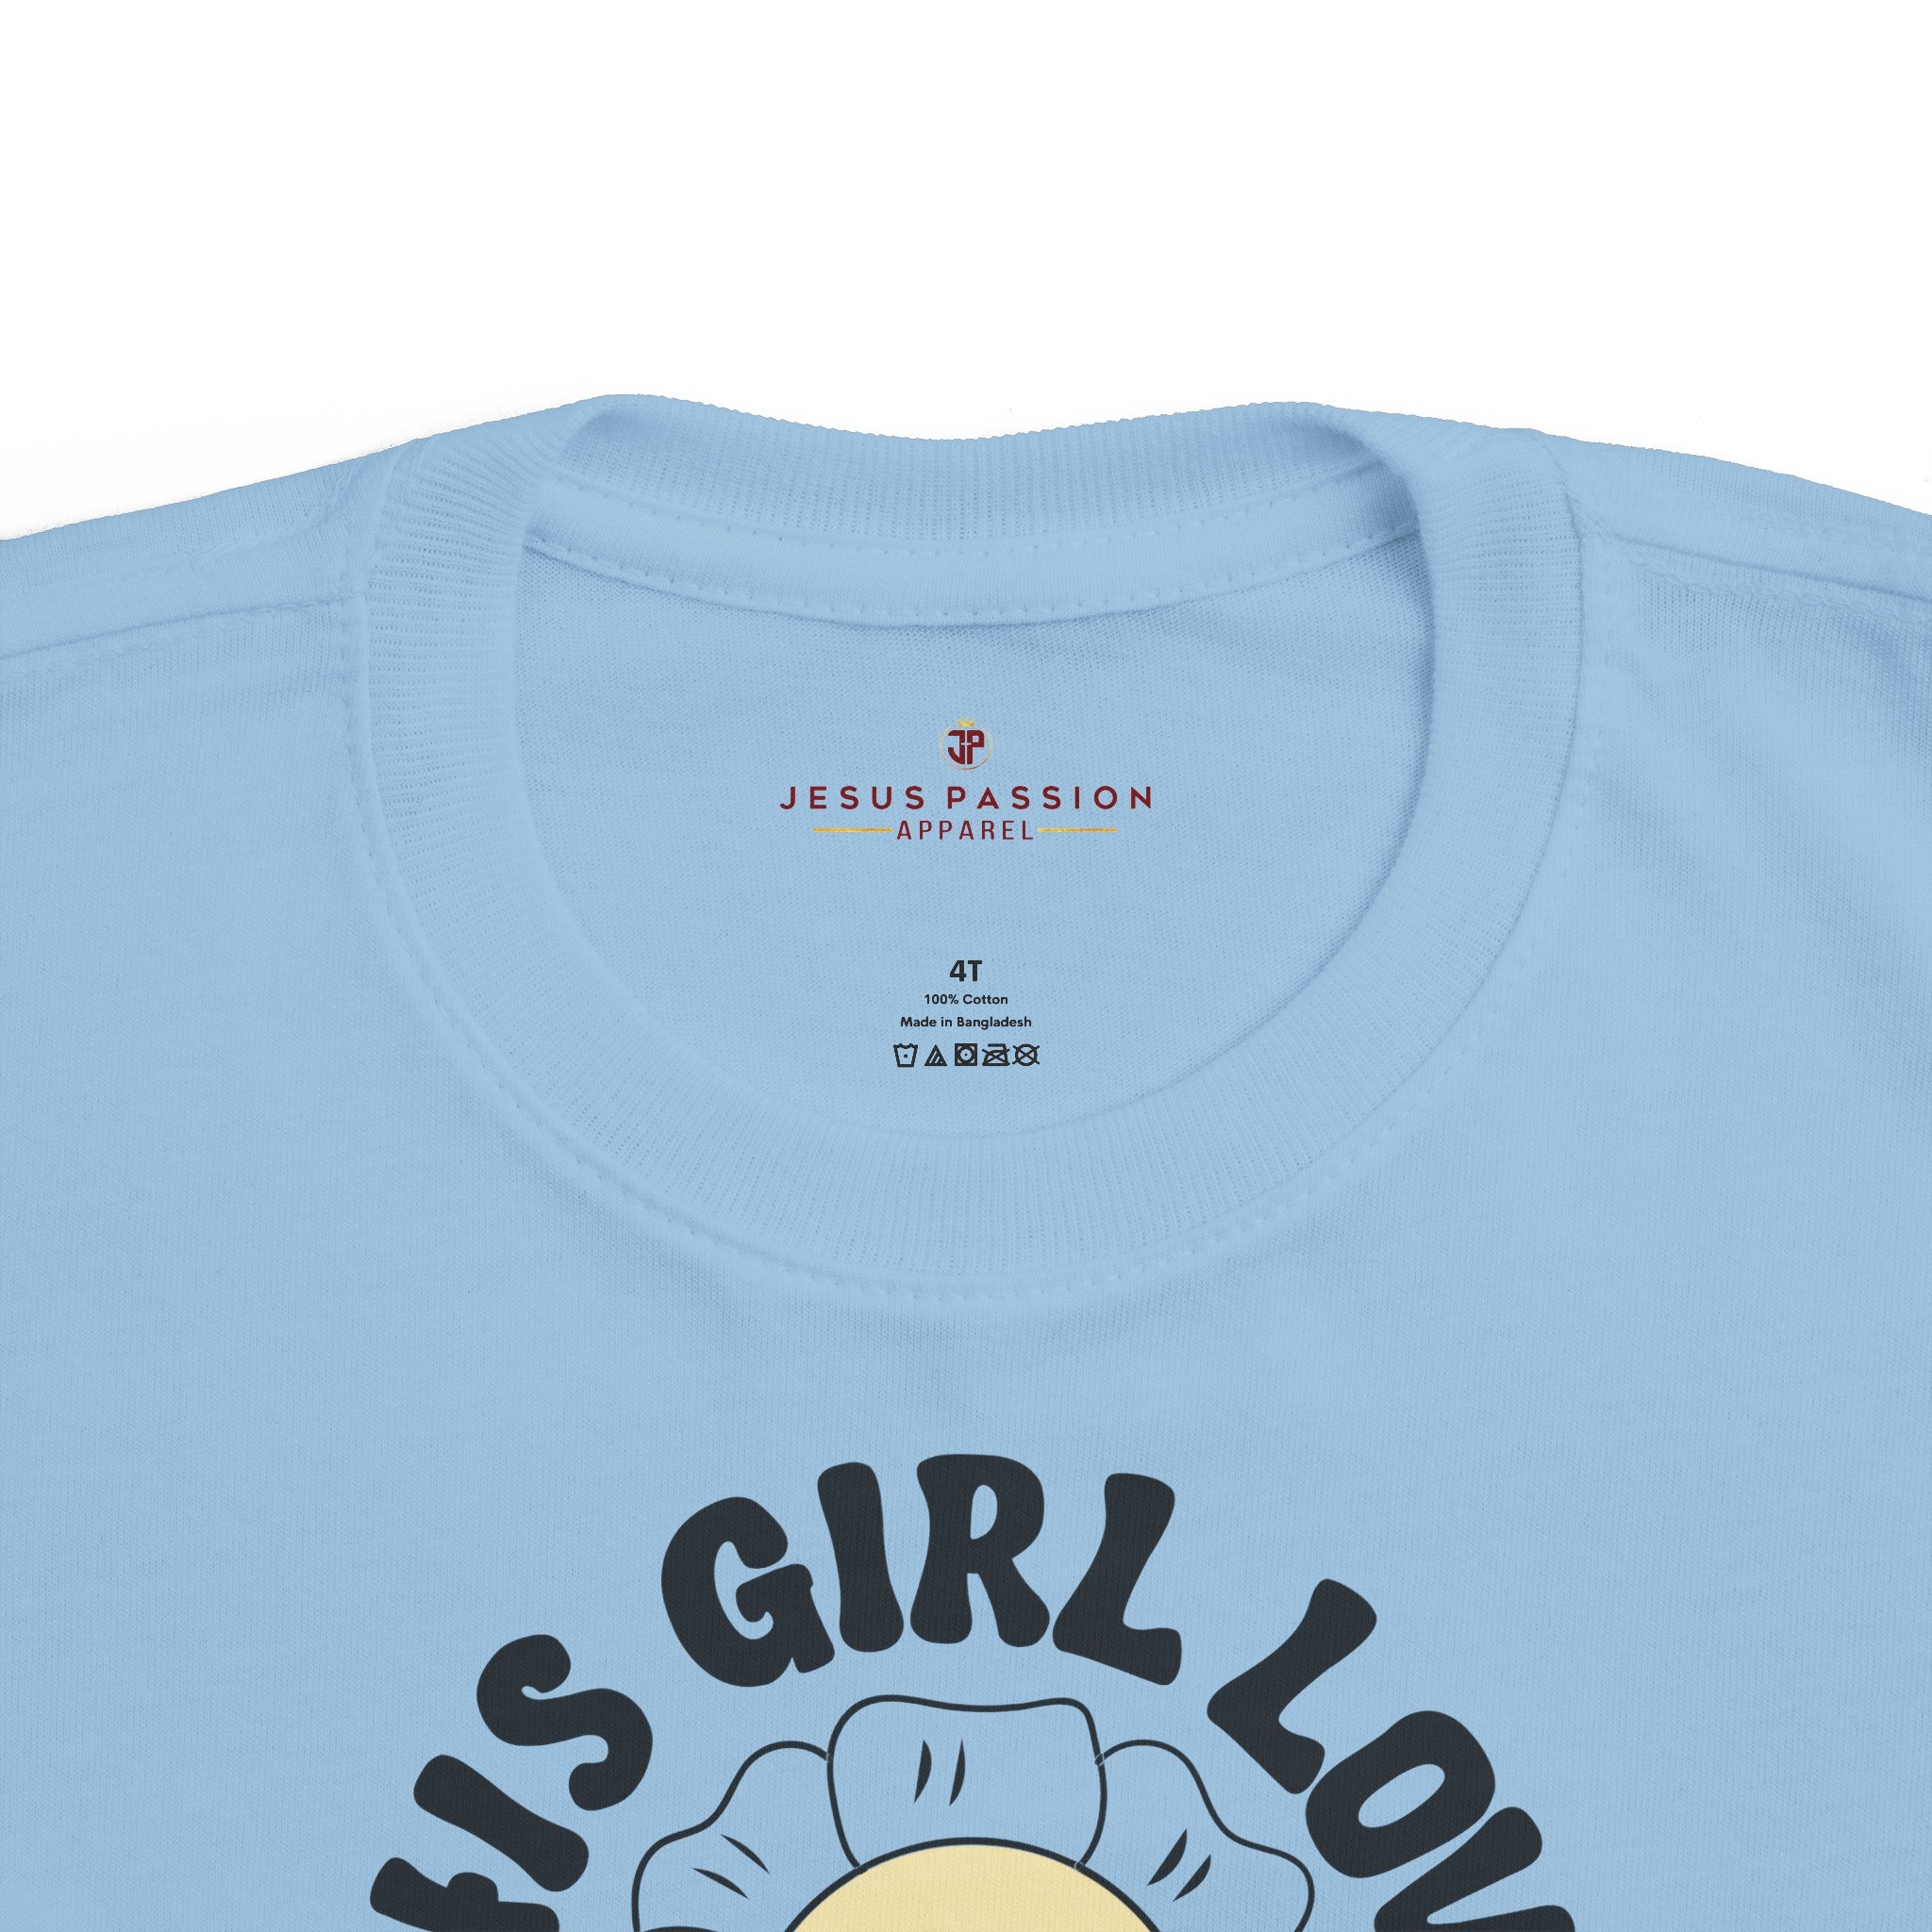 This Girl Loves Jesus Toddler's Fine Jersey Tee Color: Light Blue Size: 2T Jesus Passion Apparel